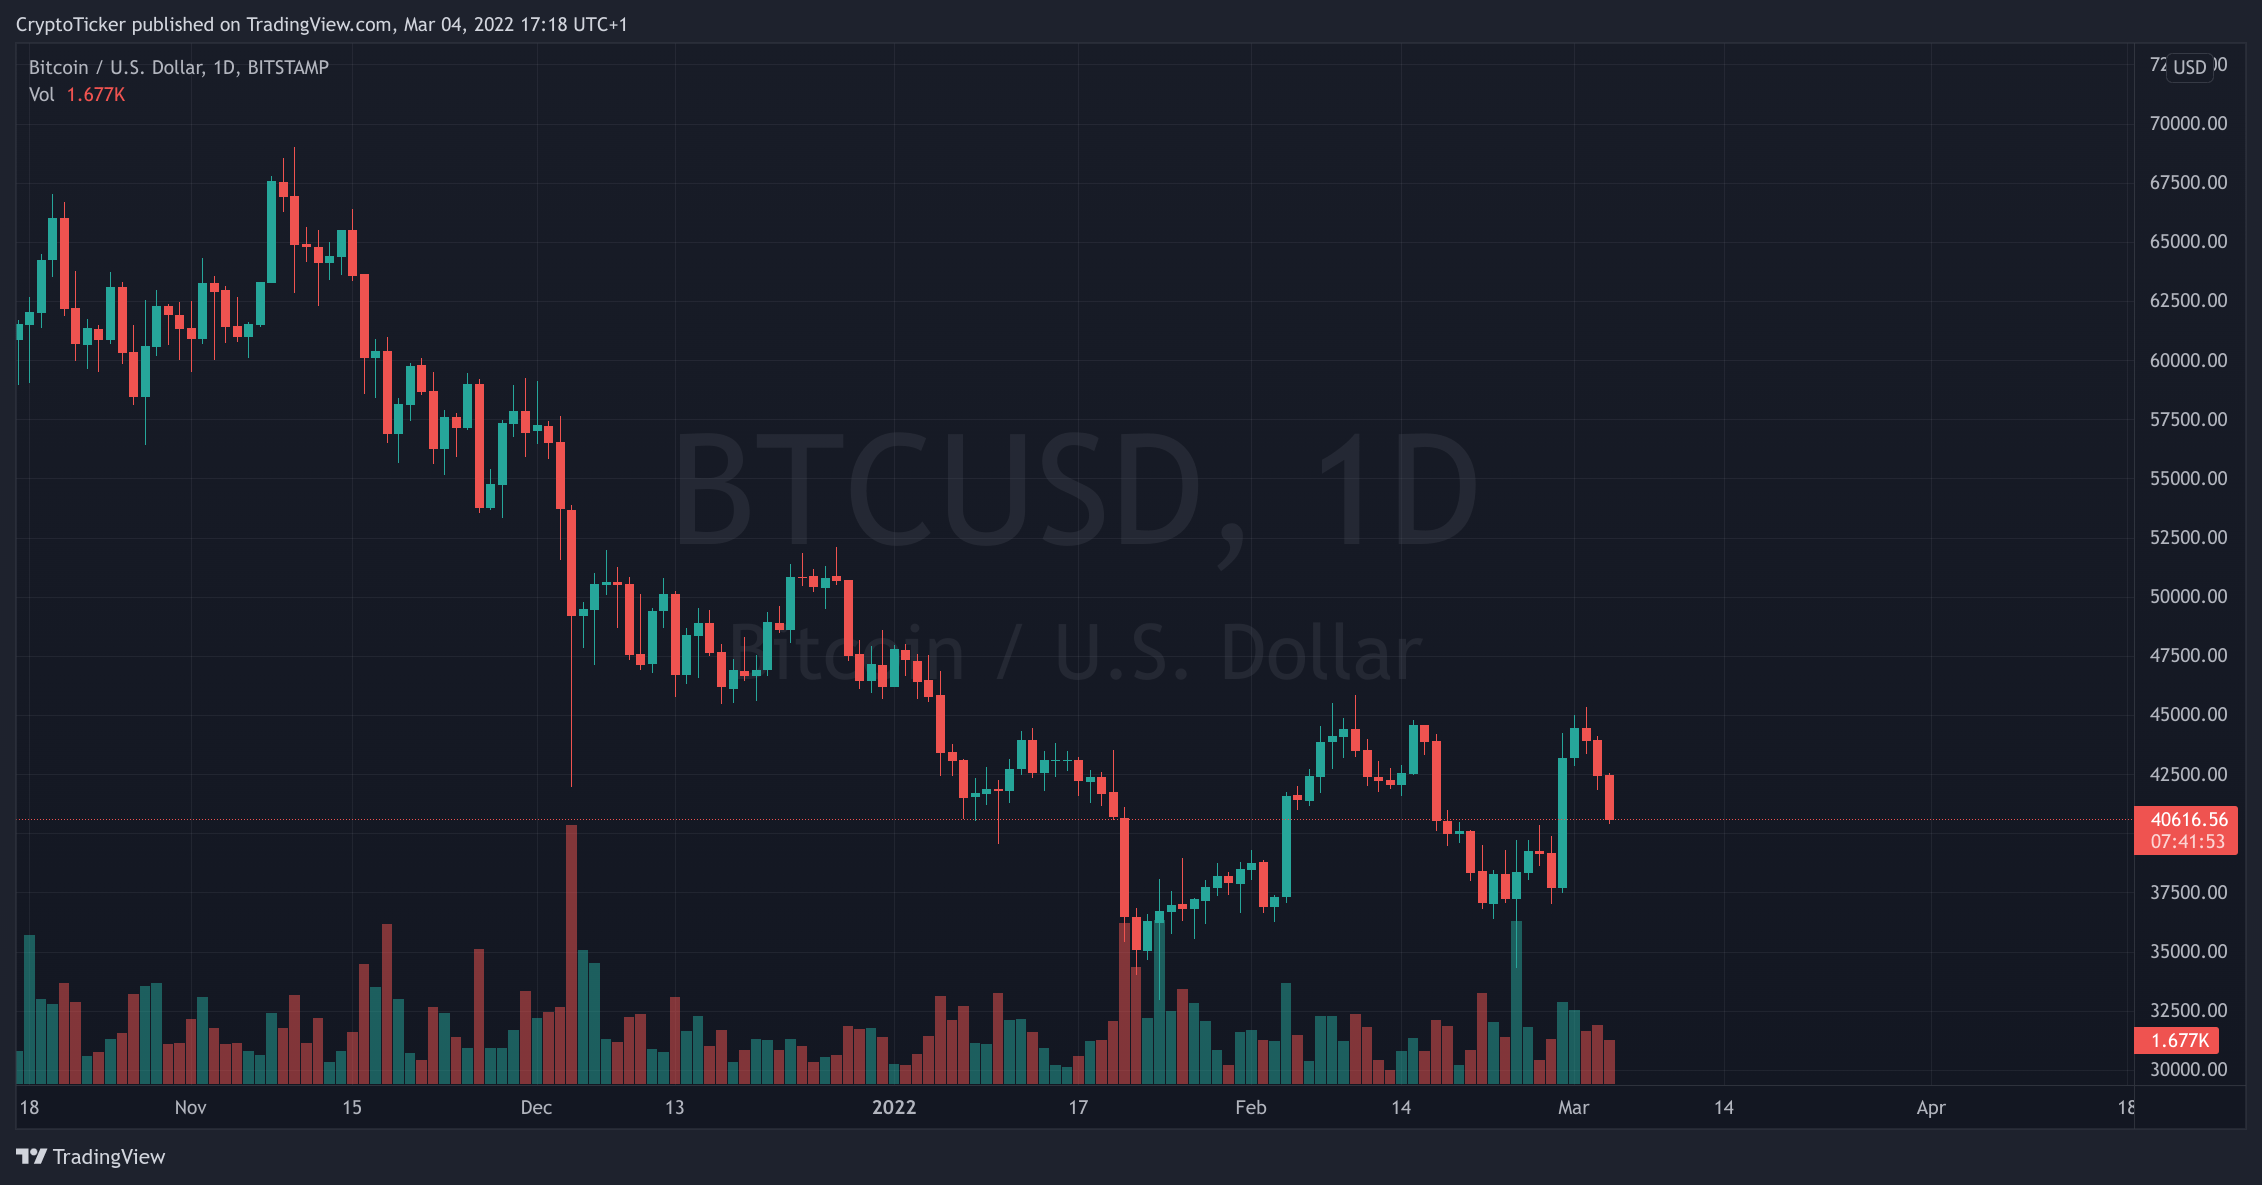 BTC/USD 1-day chart showing the falling price of BTC